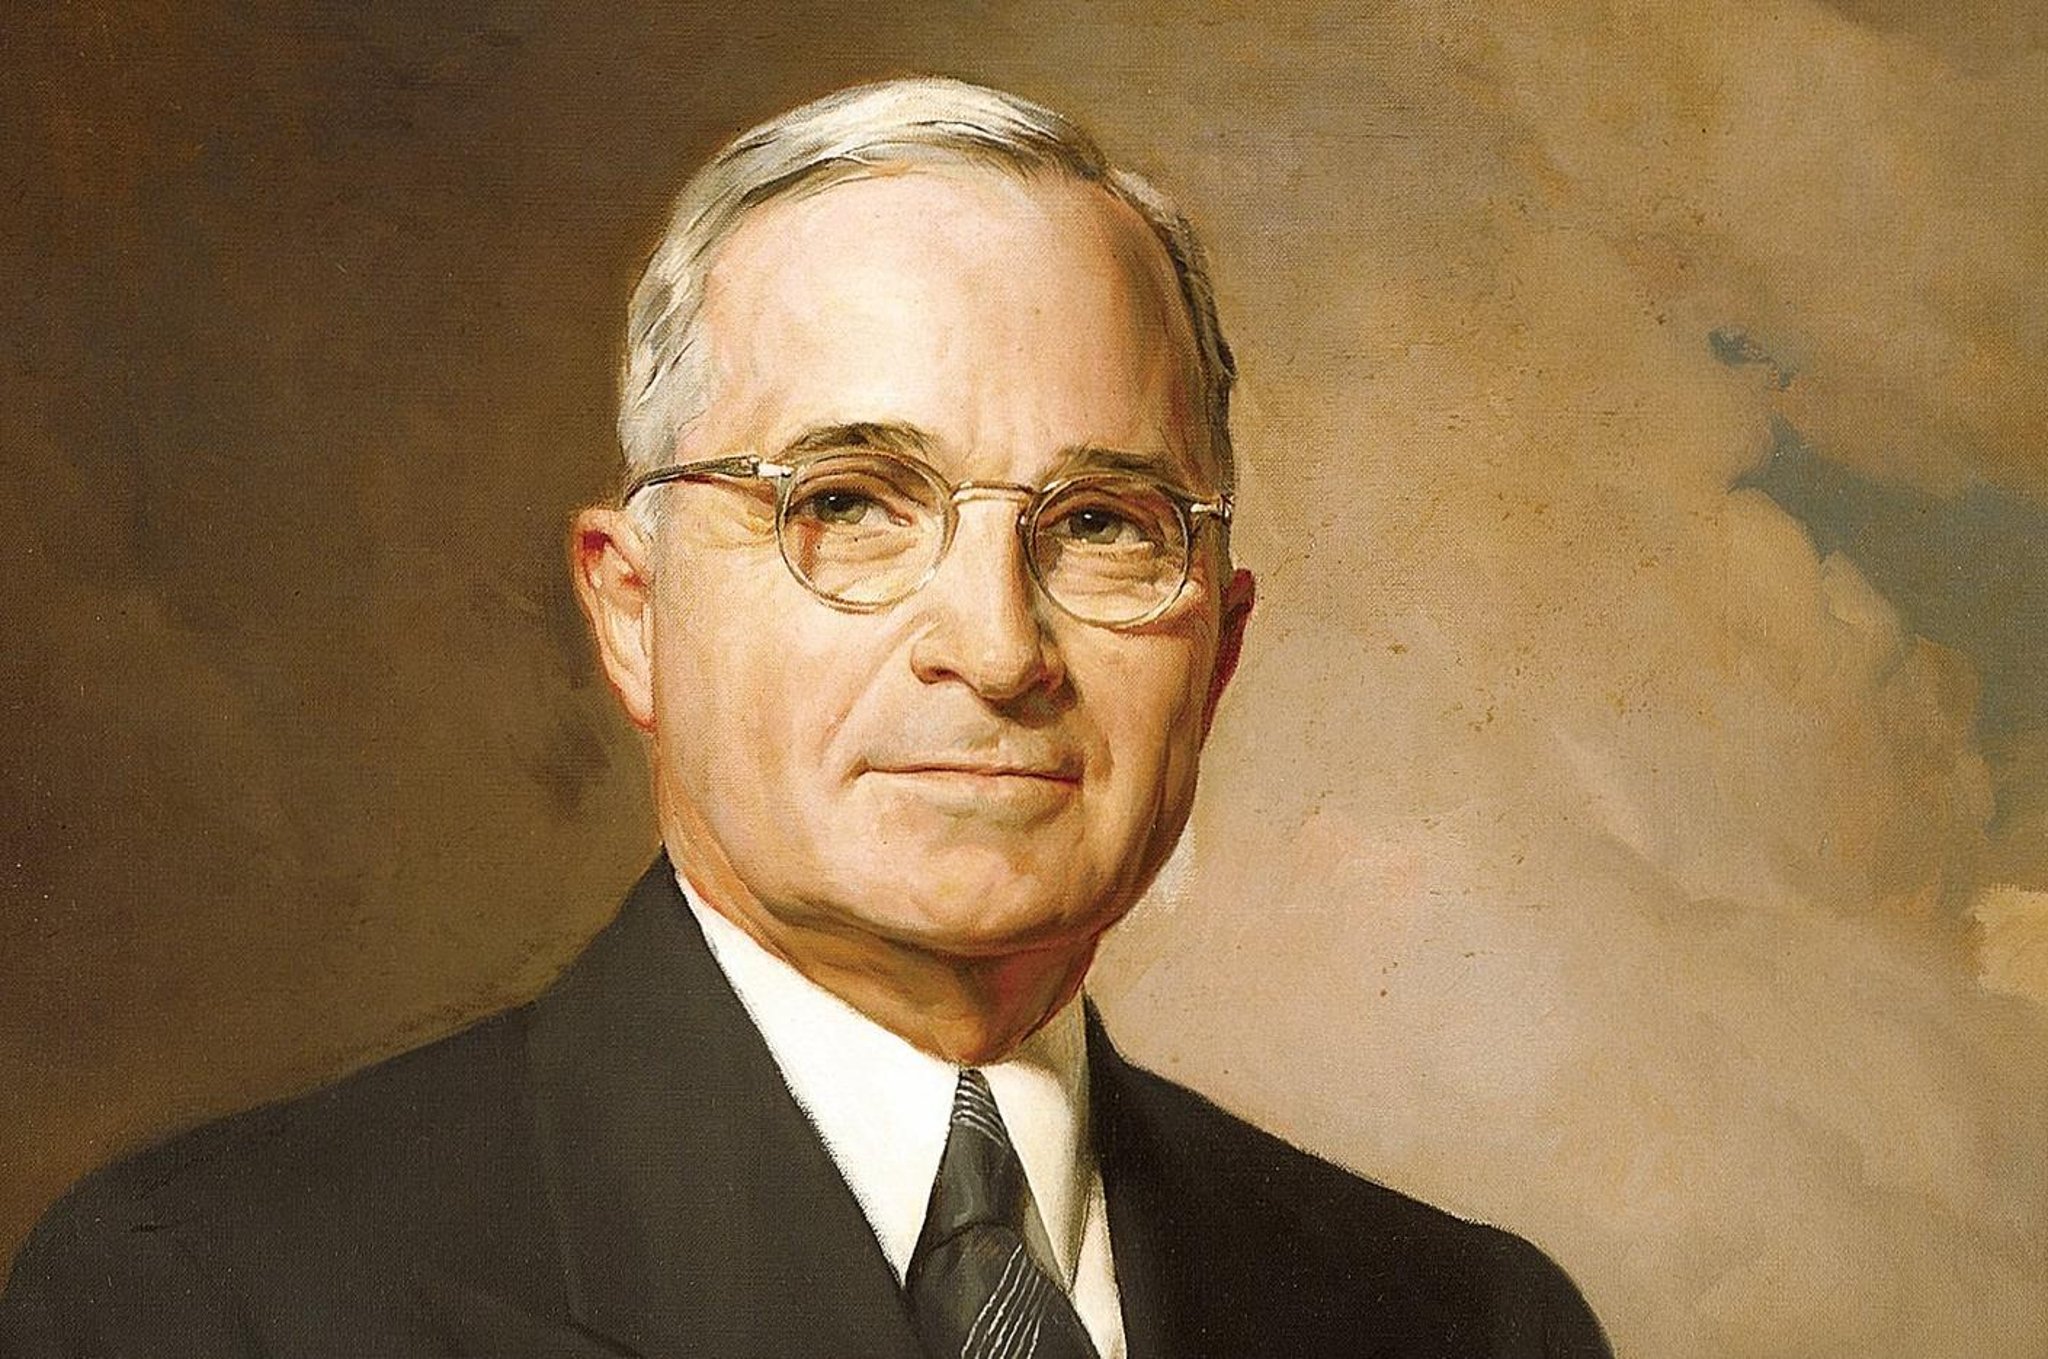 President Truman grasped reins of world leadership from Britain right after Second World War